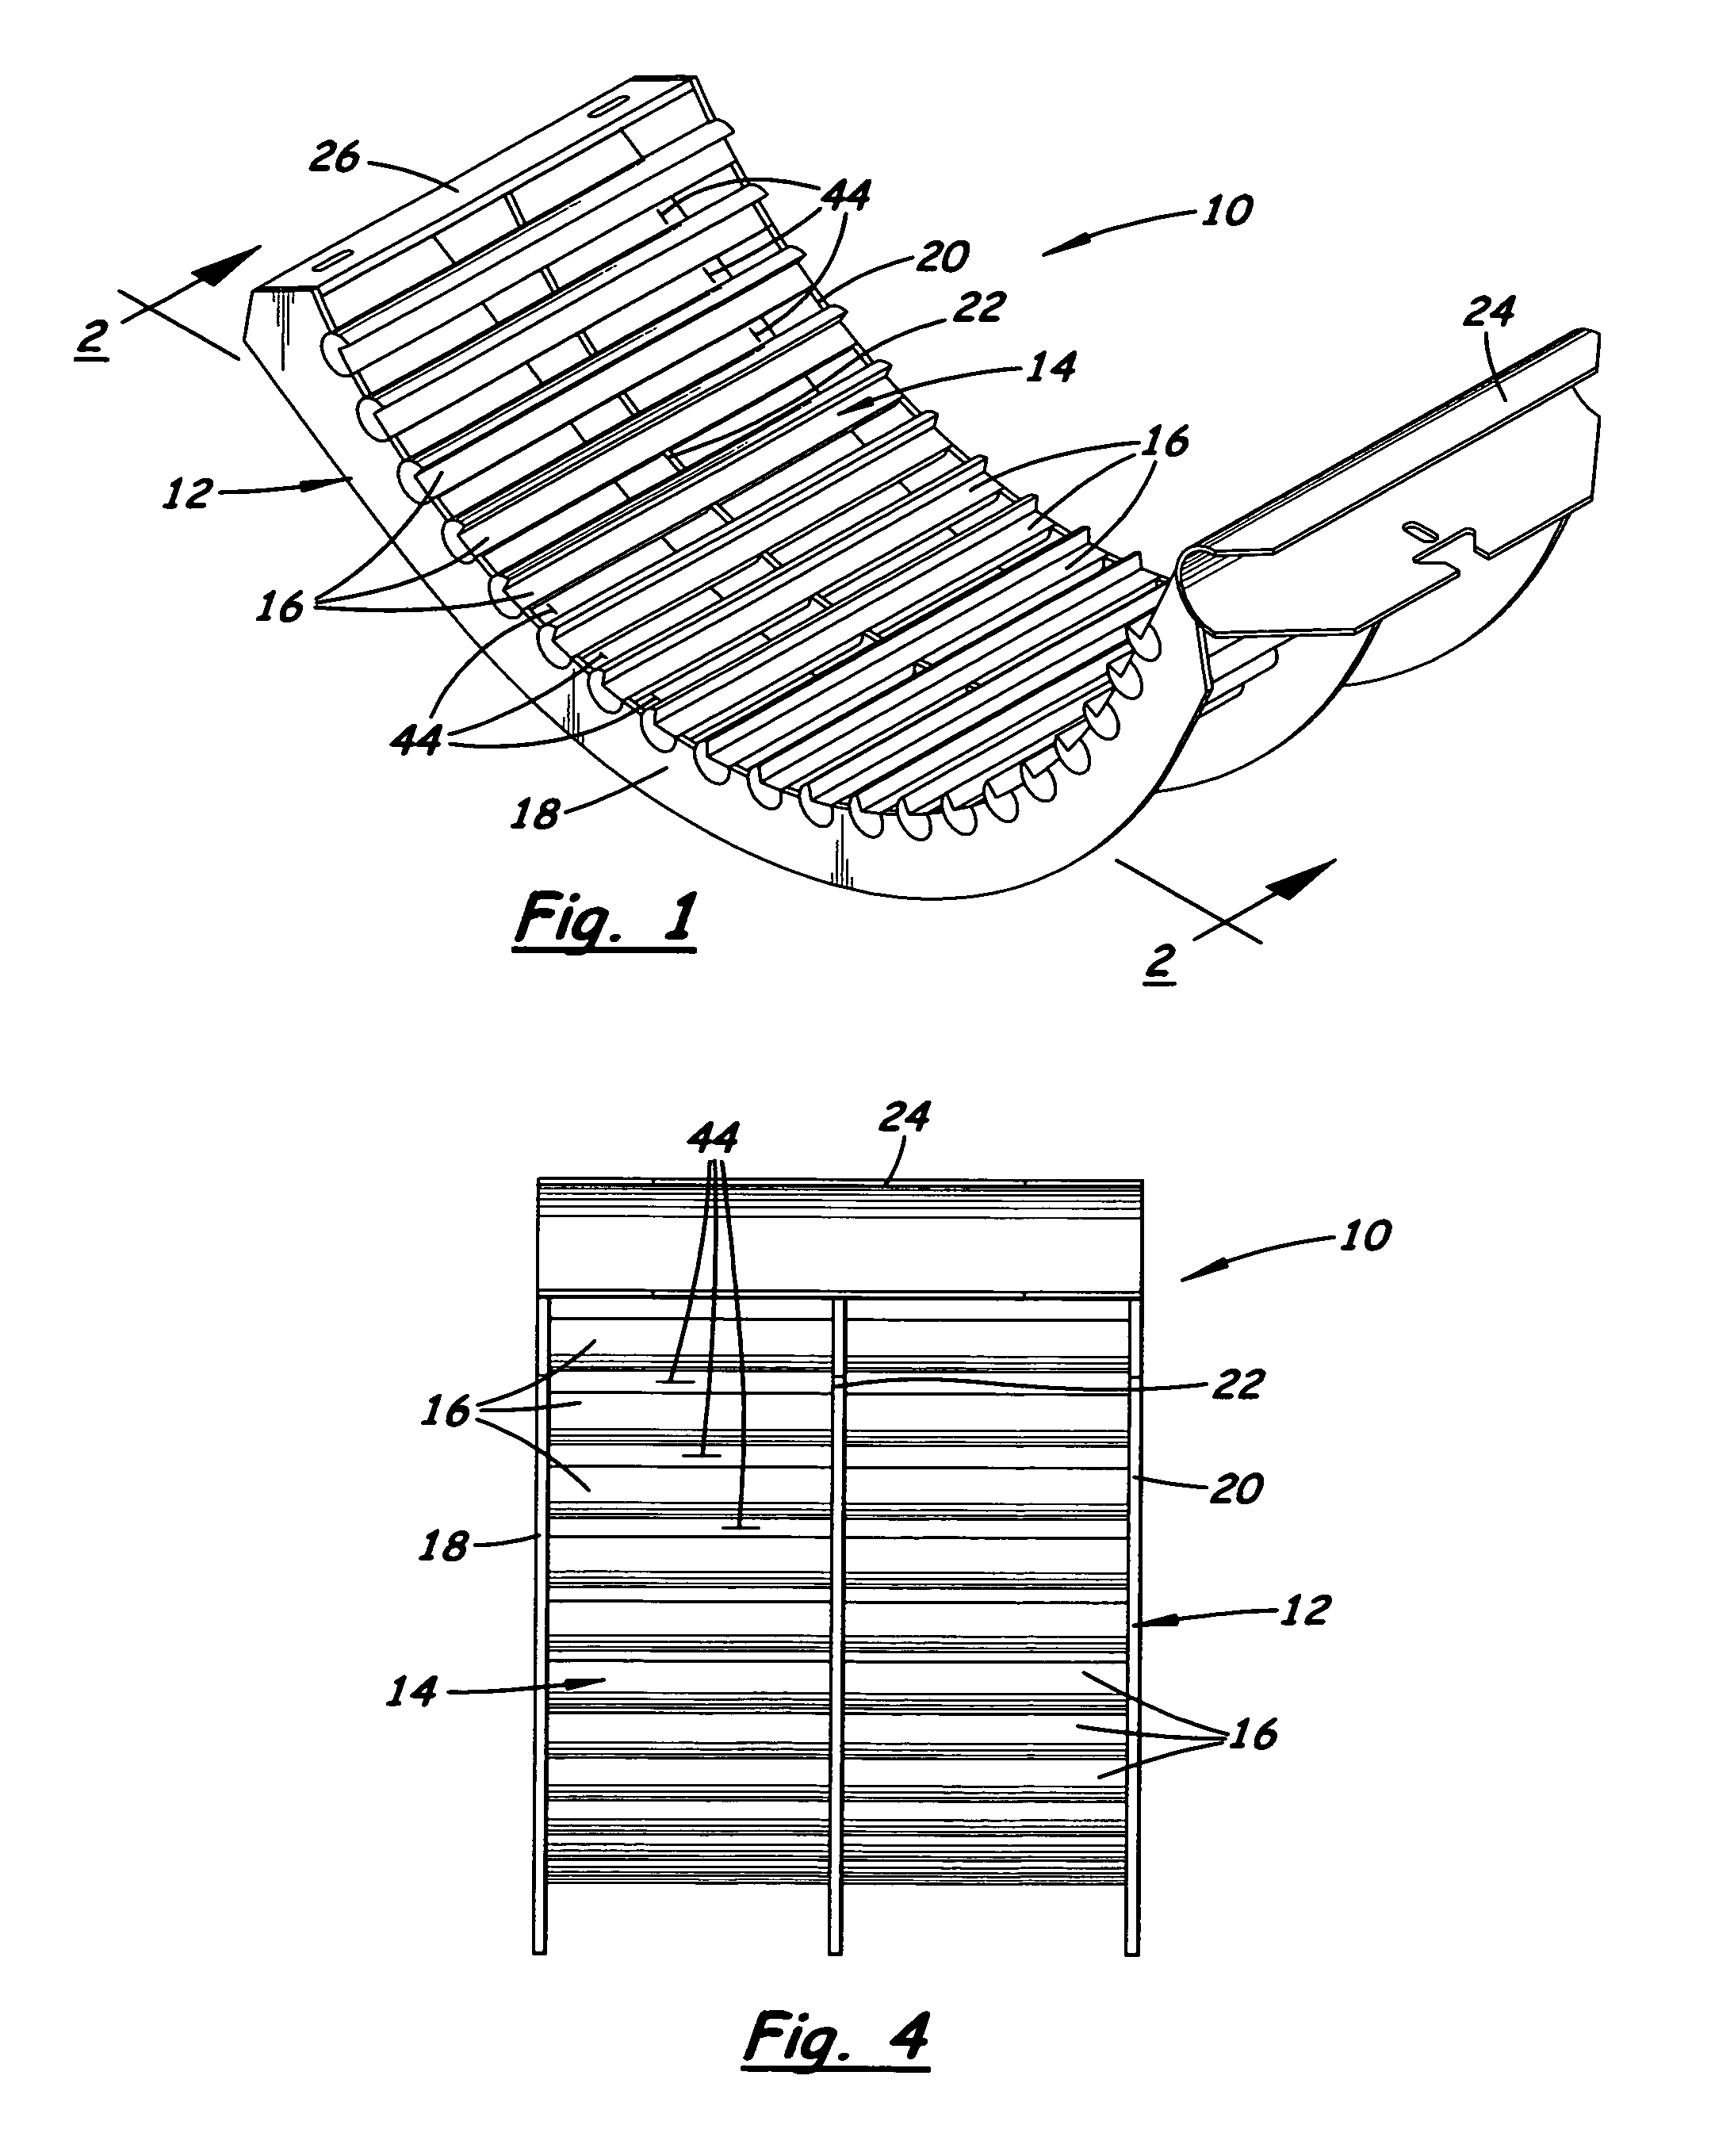 Longitudinally notched threshing element for an agricultural combine threshing concave